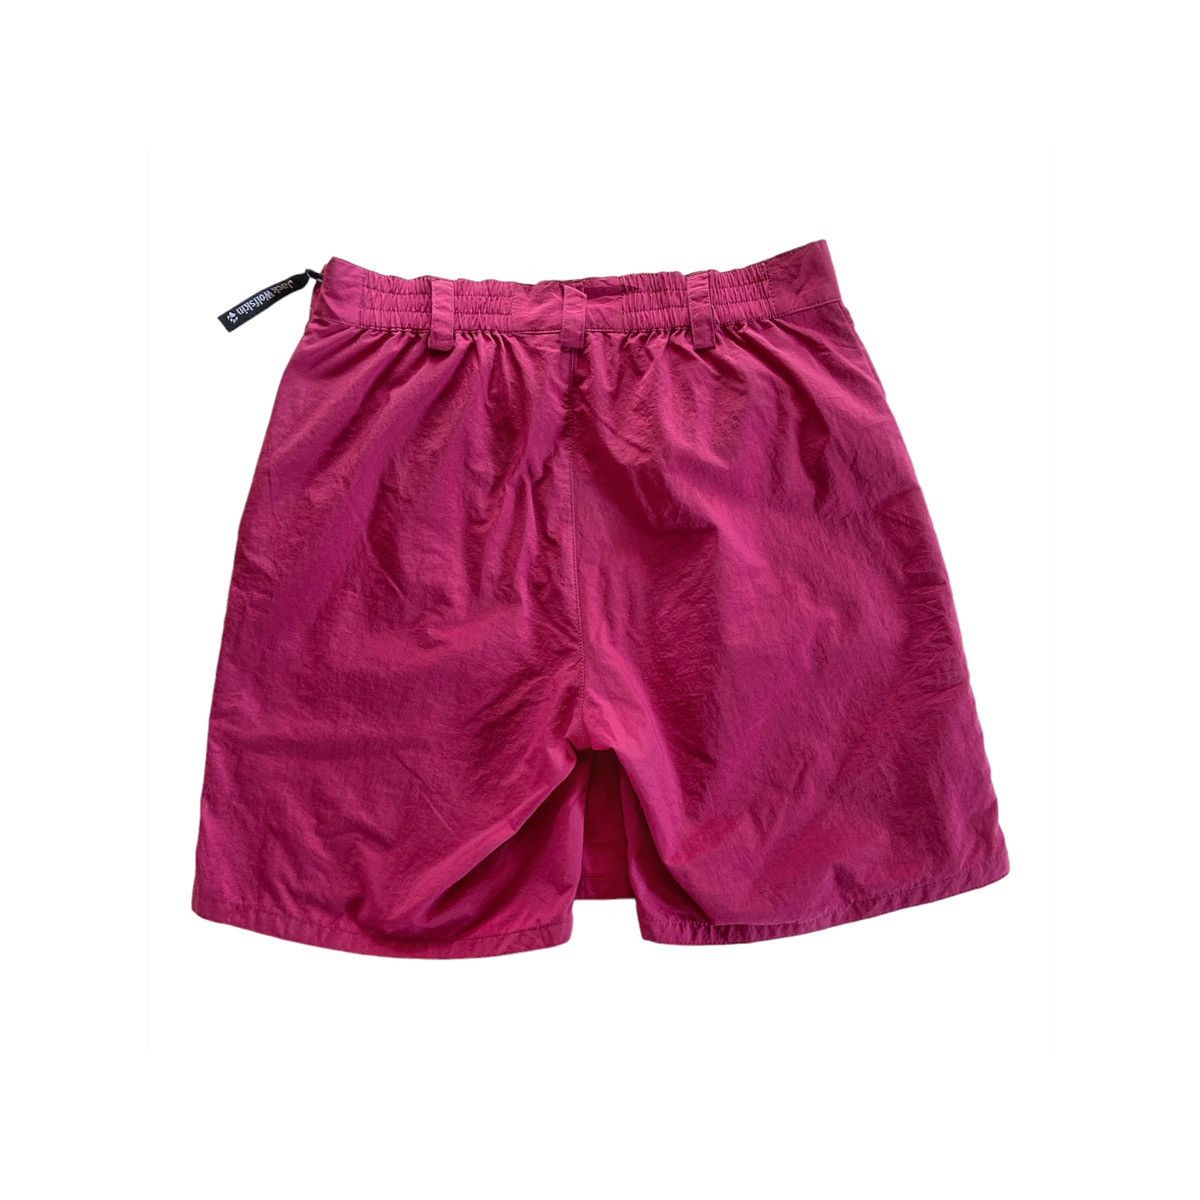 Outdoor Style Go Out! - Jack Wolfskin Utility Shorts - 3